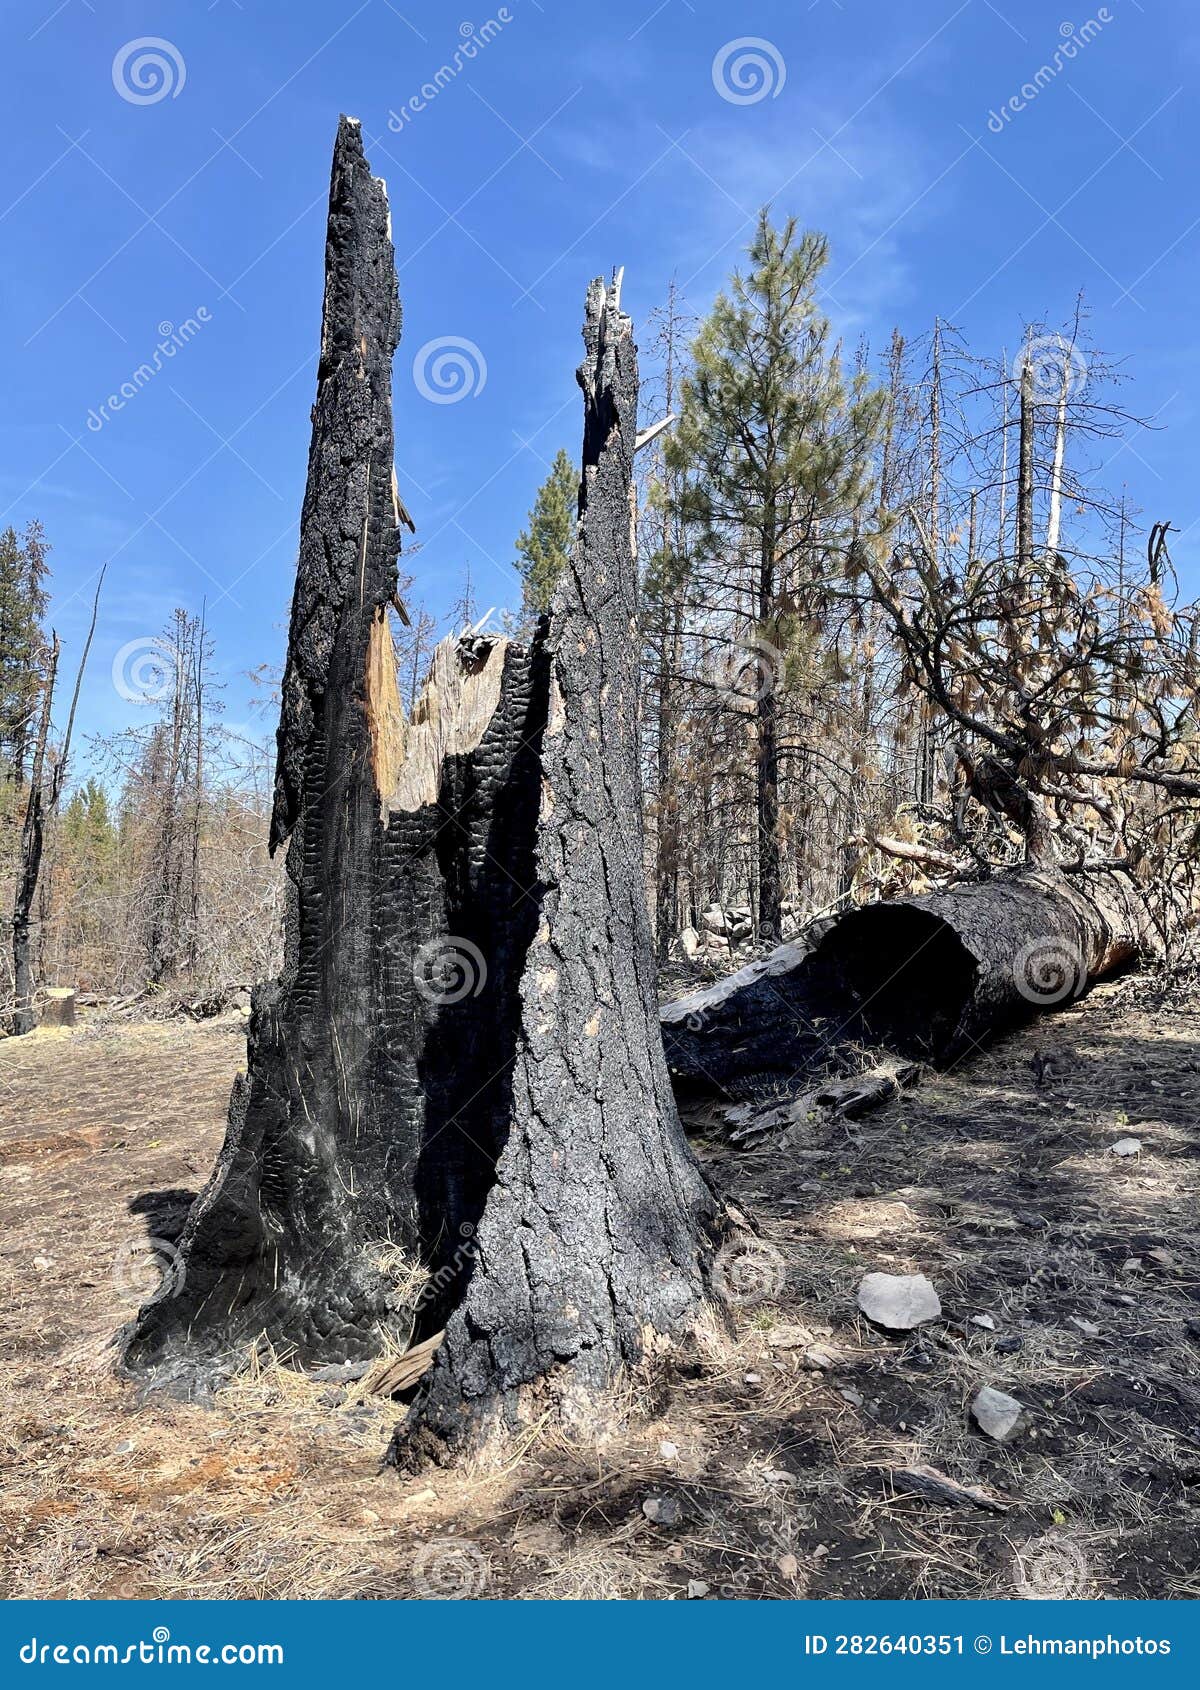 burned tree wildfire forest view